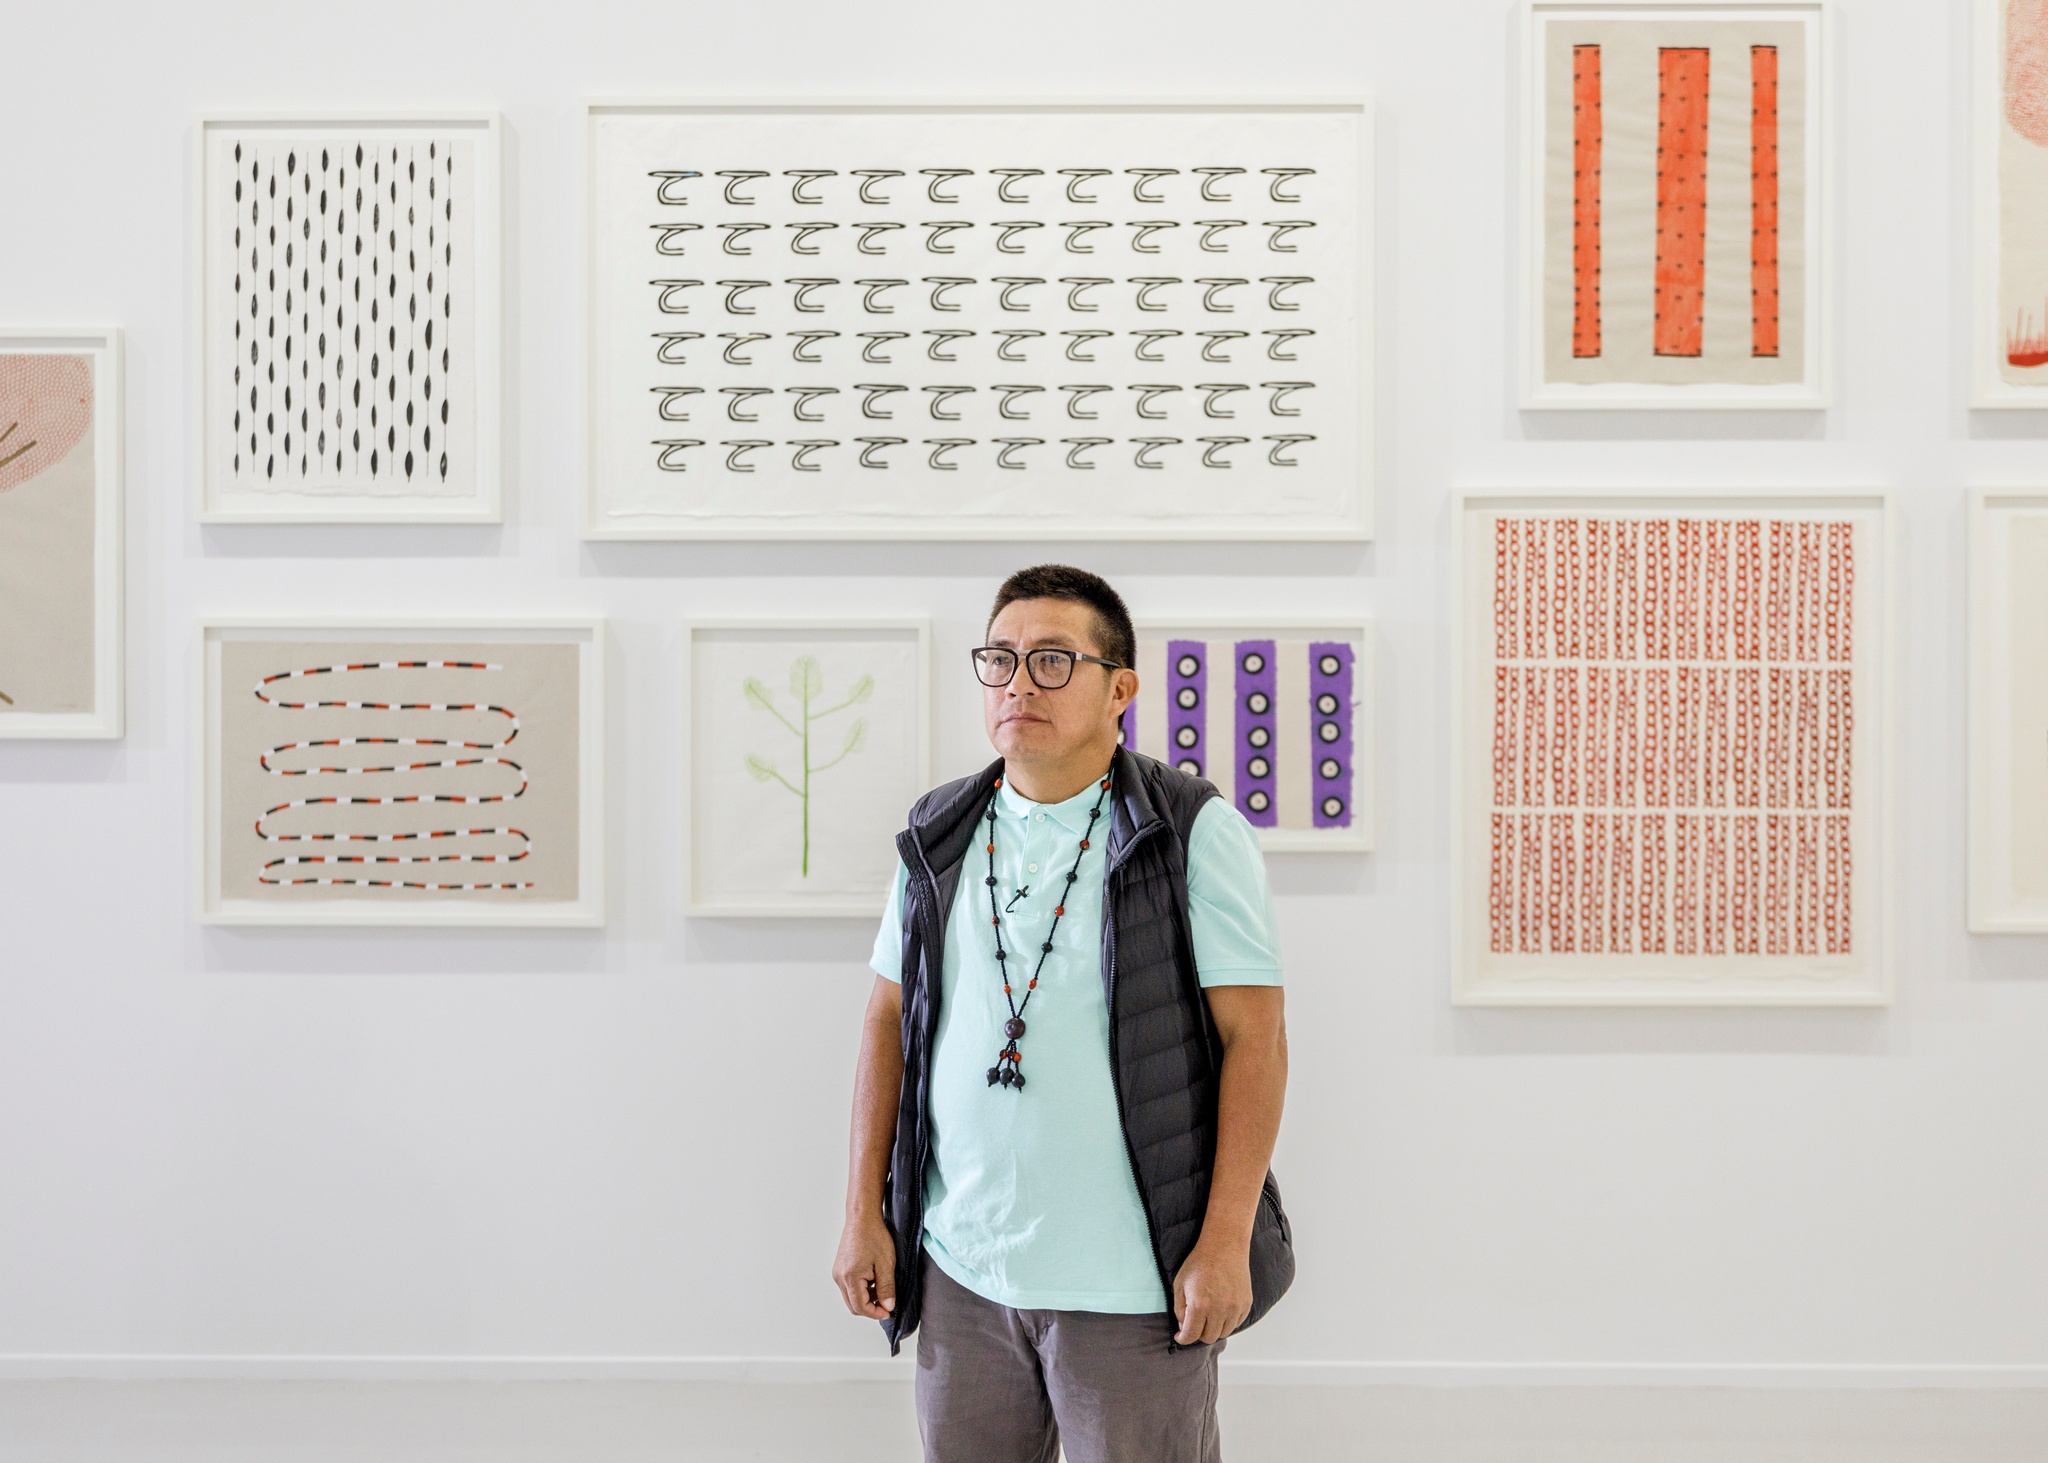 A portrait of Sheroanawe Hakihiiwe. An Indigenous Yanomami man, Sheroanawe poses in front of a gallery wall with numerous of his framed drawings. He wears a black puffer vest, a teal t-shirt, and a long beaded necklace that hags down nearly to his waist. He has short cropped dark hair and wears round-frame glasses. 